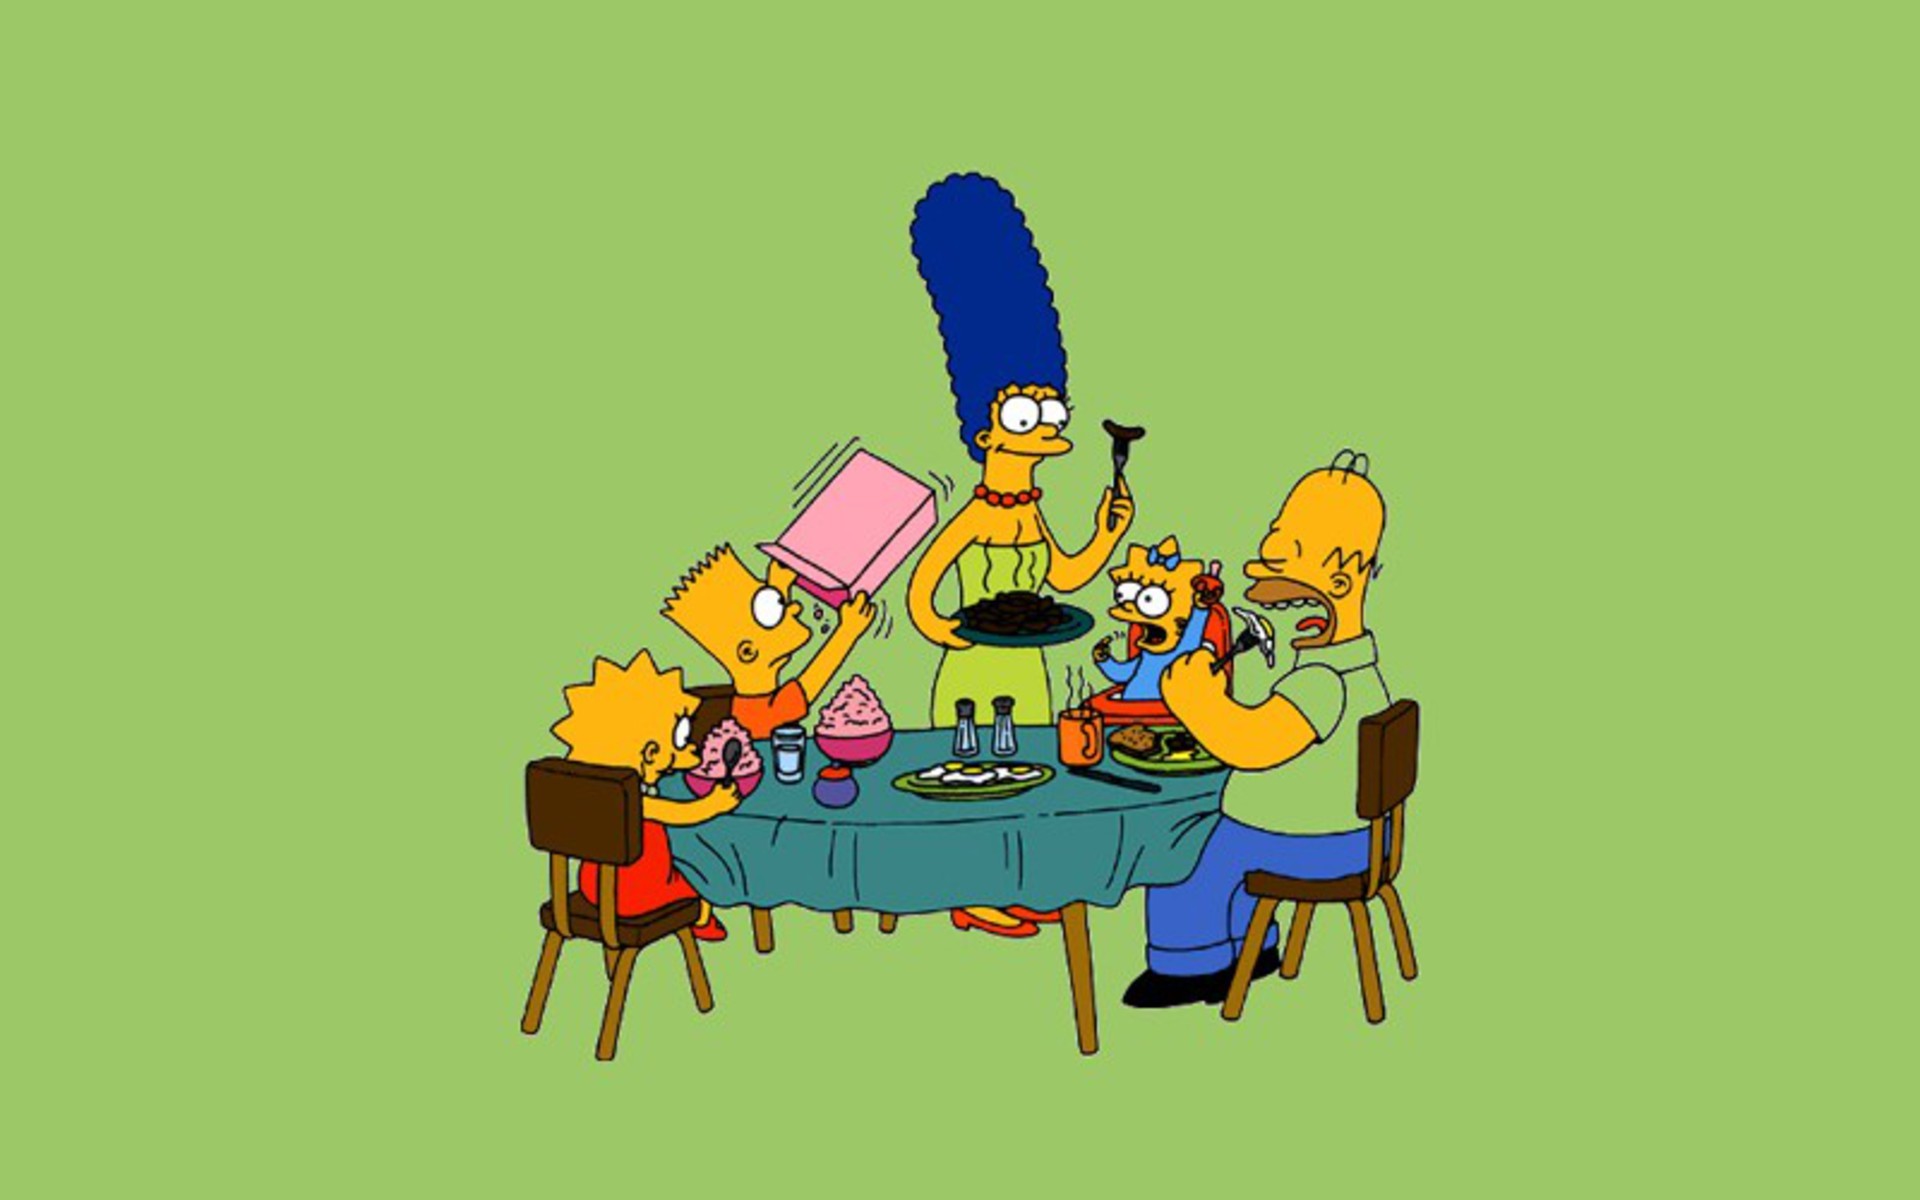 1920x1200 Scared Homer Simpson The Simpsons wallpaper Cartoon wallpapers